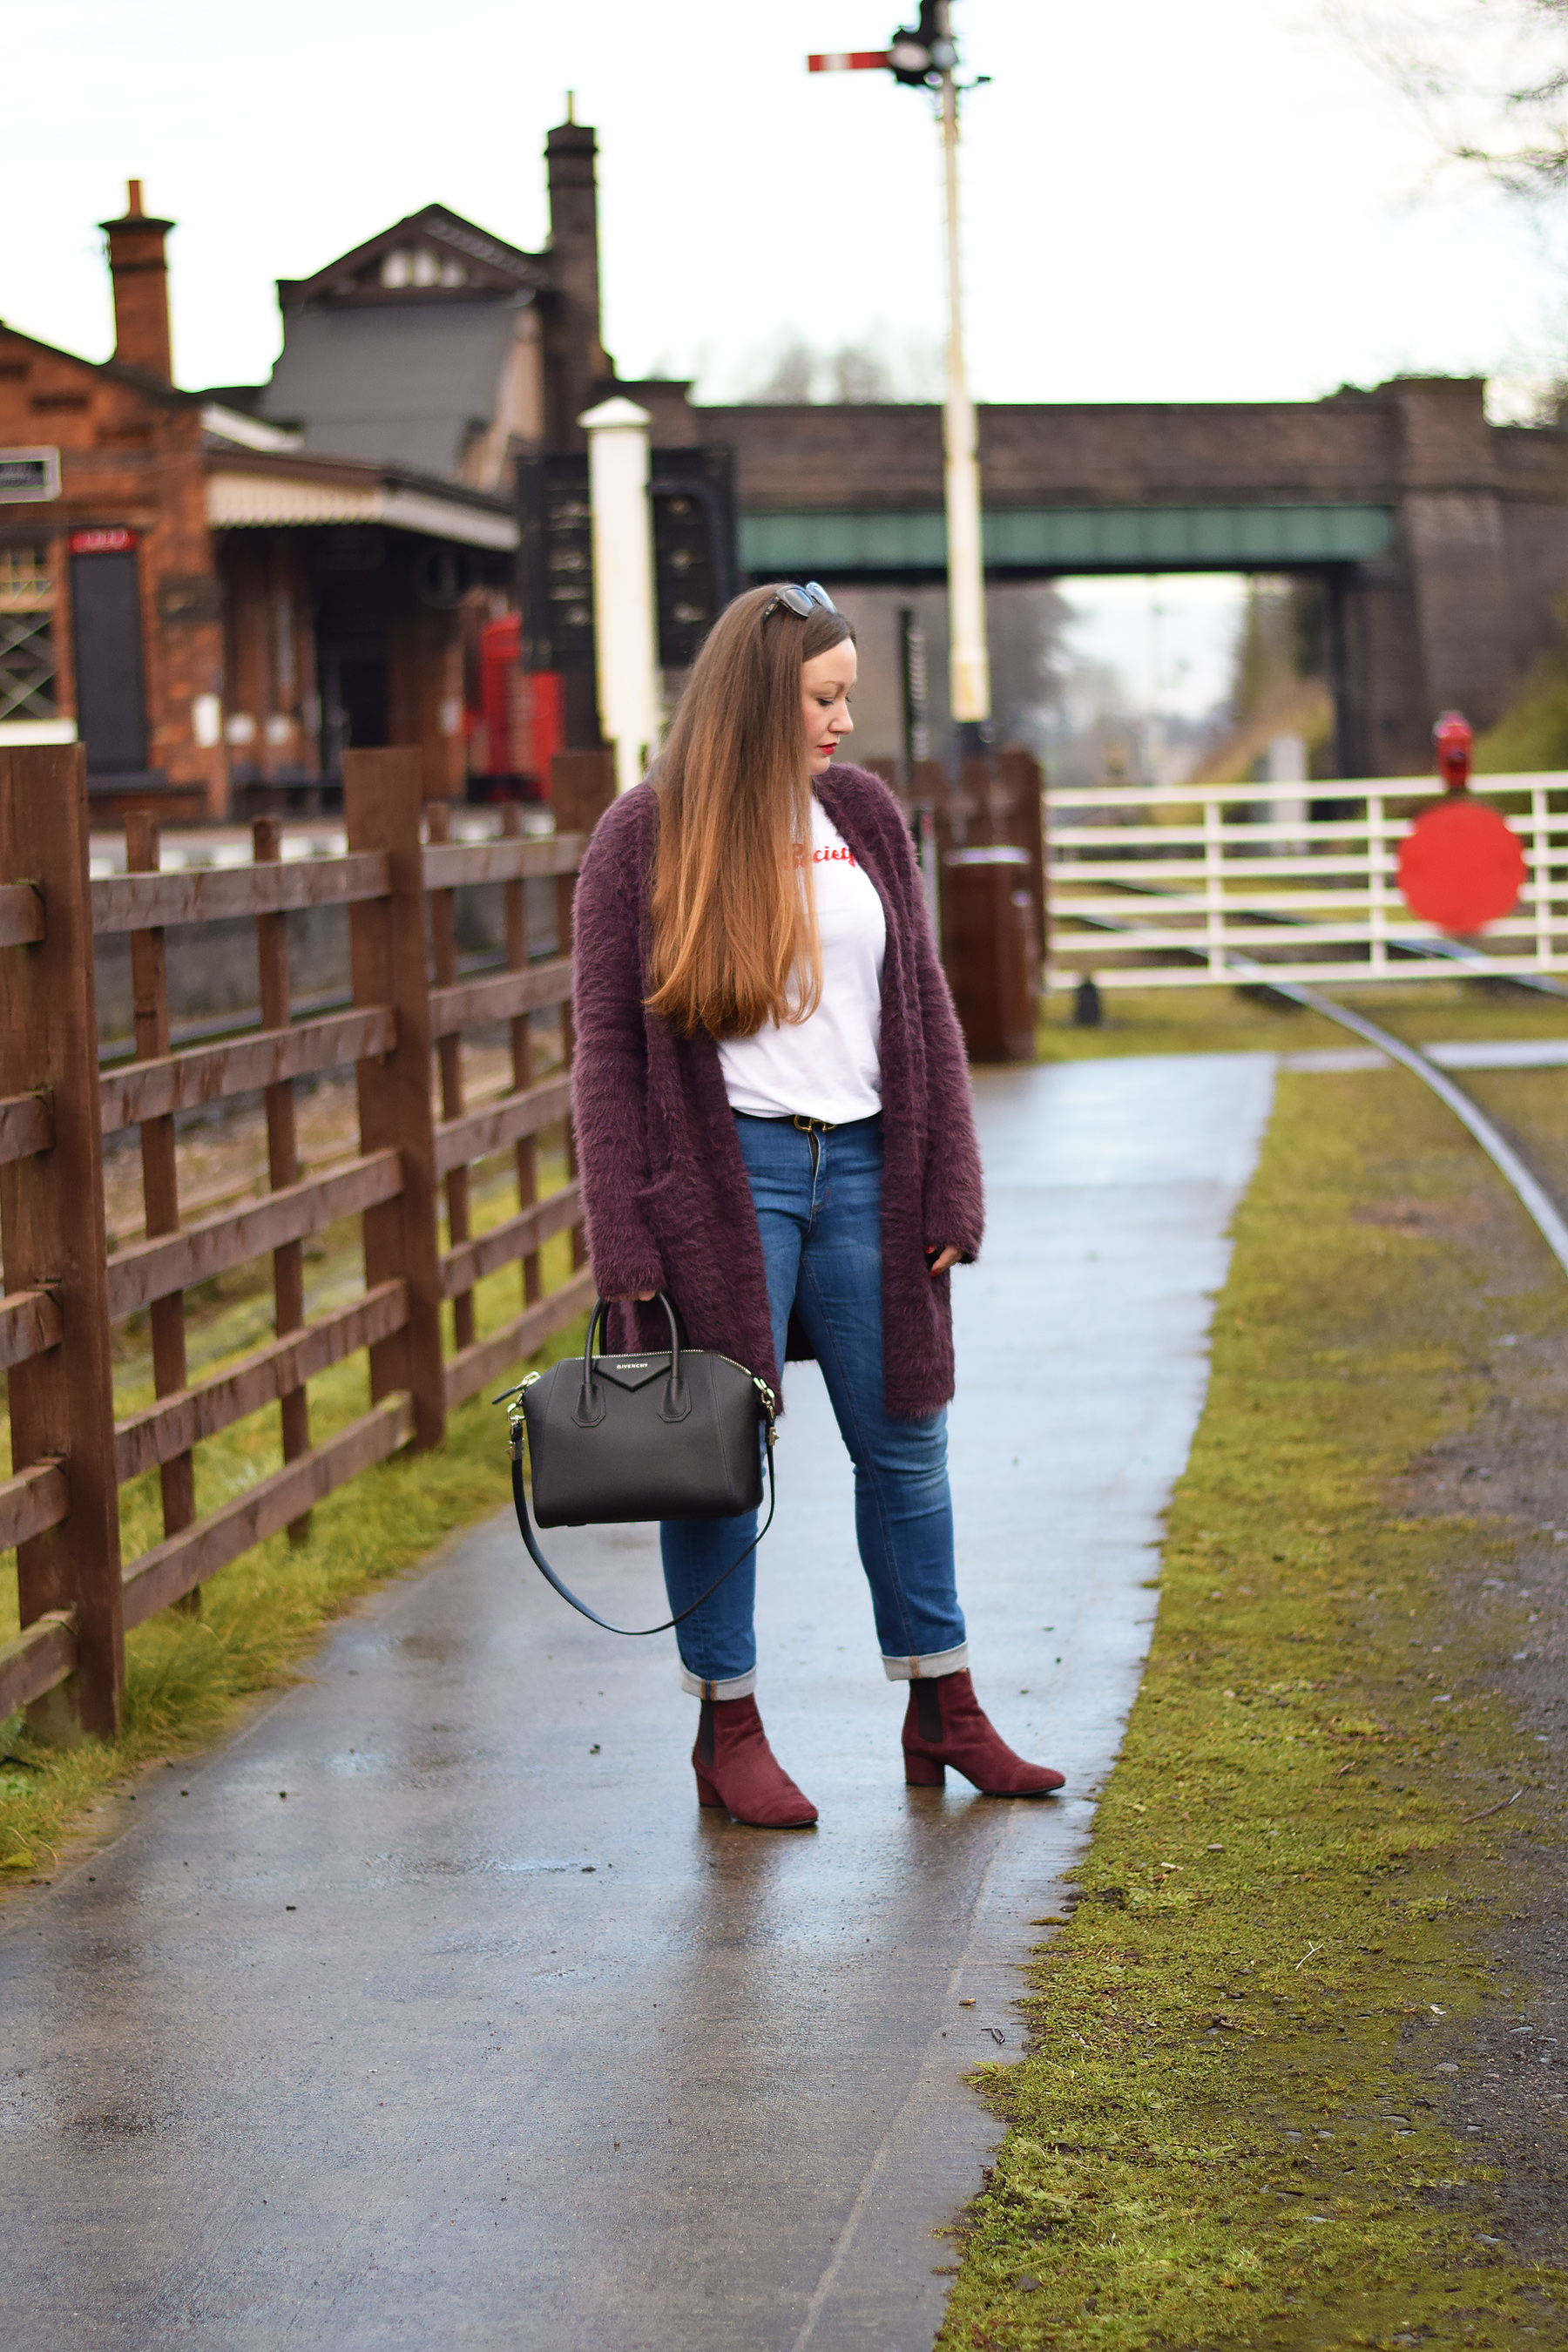 Gemma From jacquard Flower wearing burgundy fluffy cardigan outfit